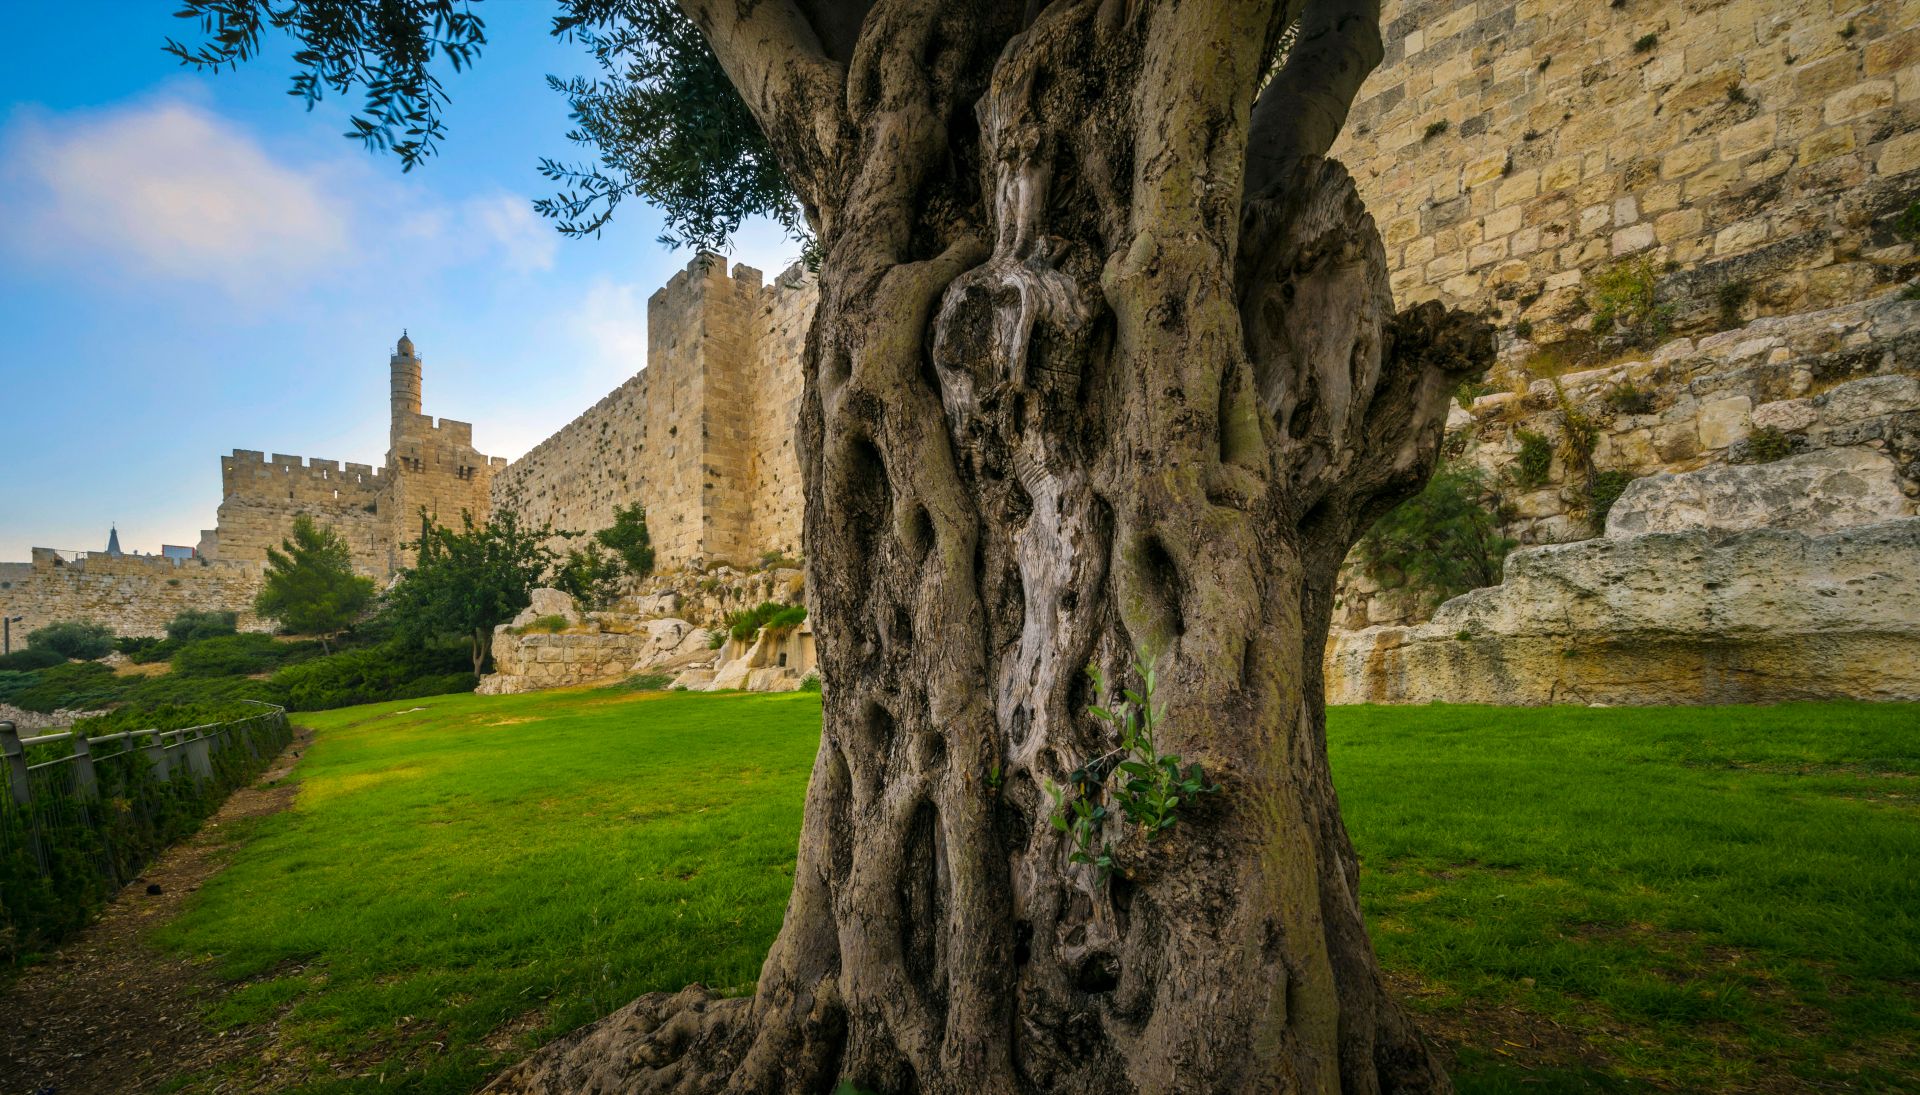 ISRAEL The,Trunk,Of,An,Old,Olive,Tree,,With,A,Minaret